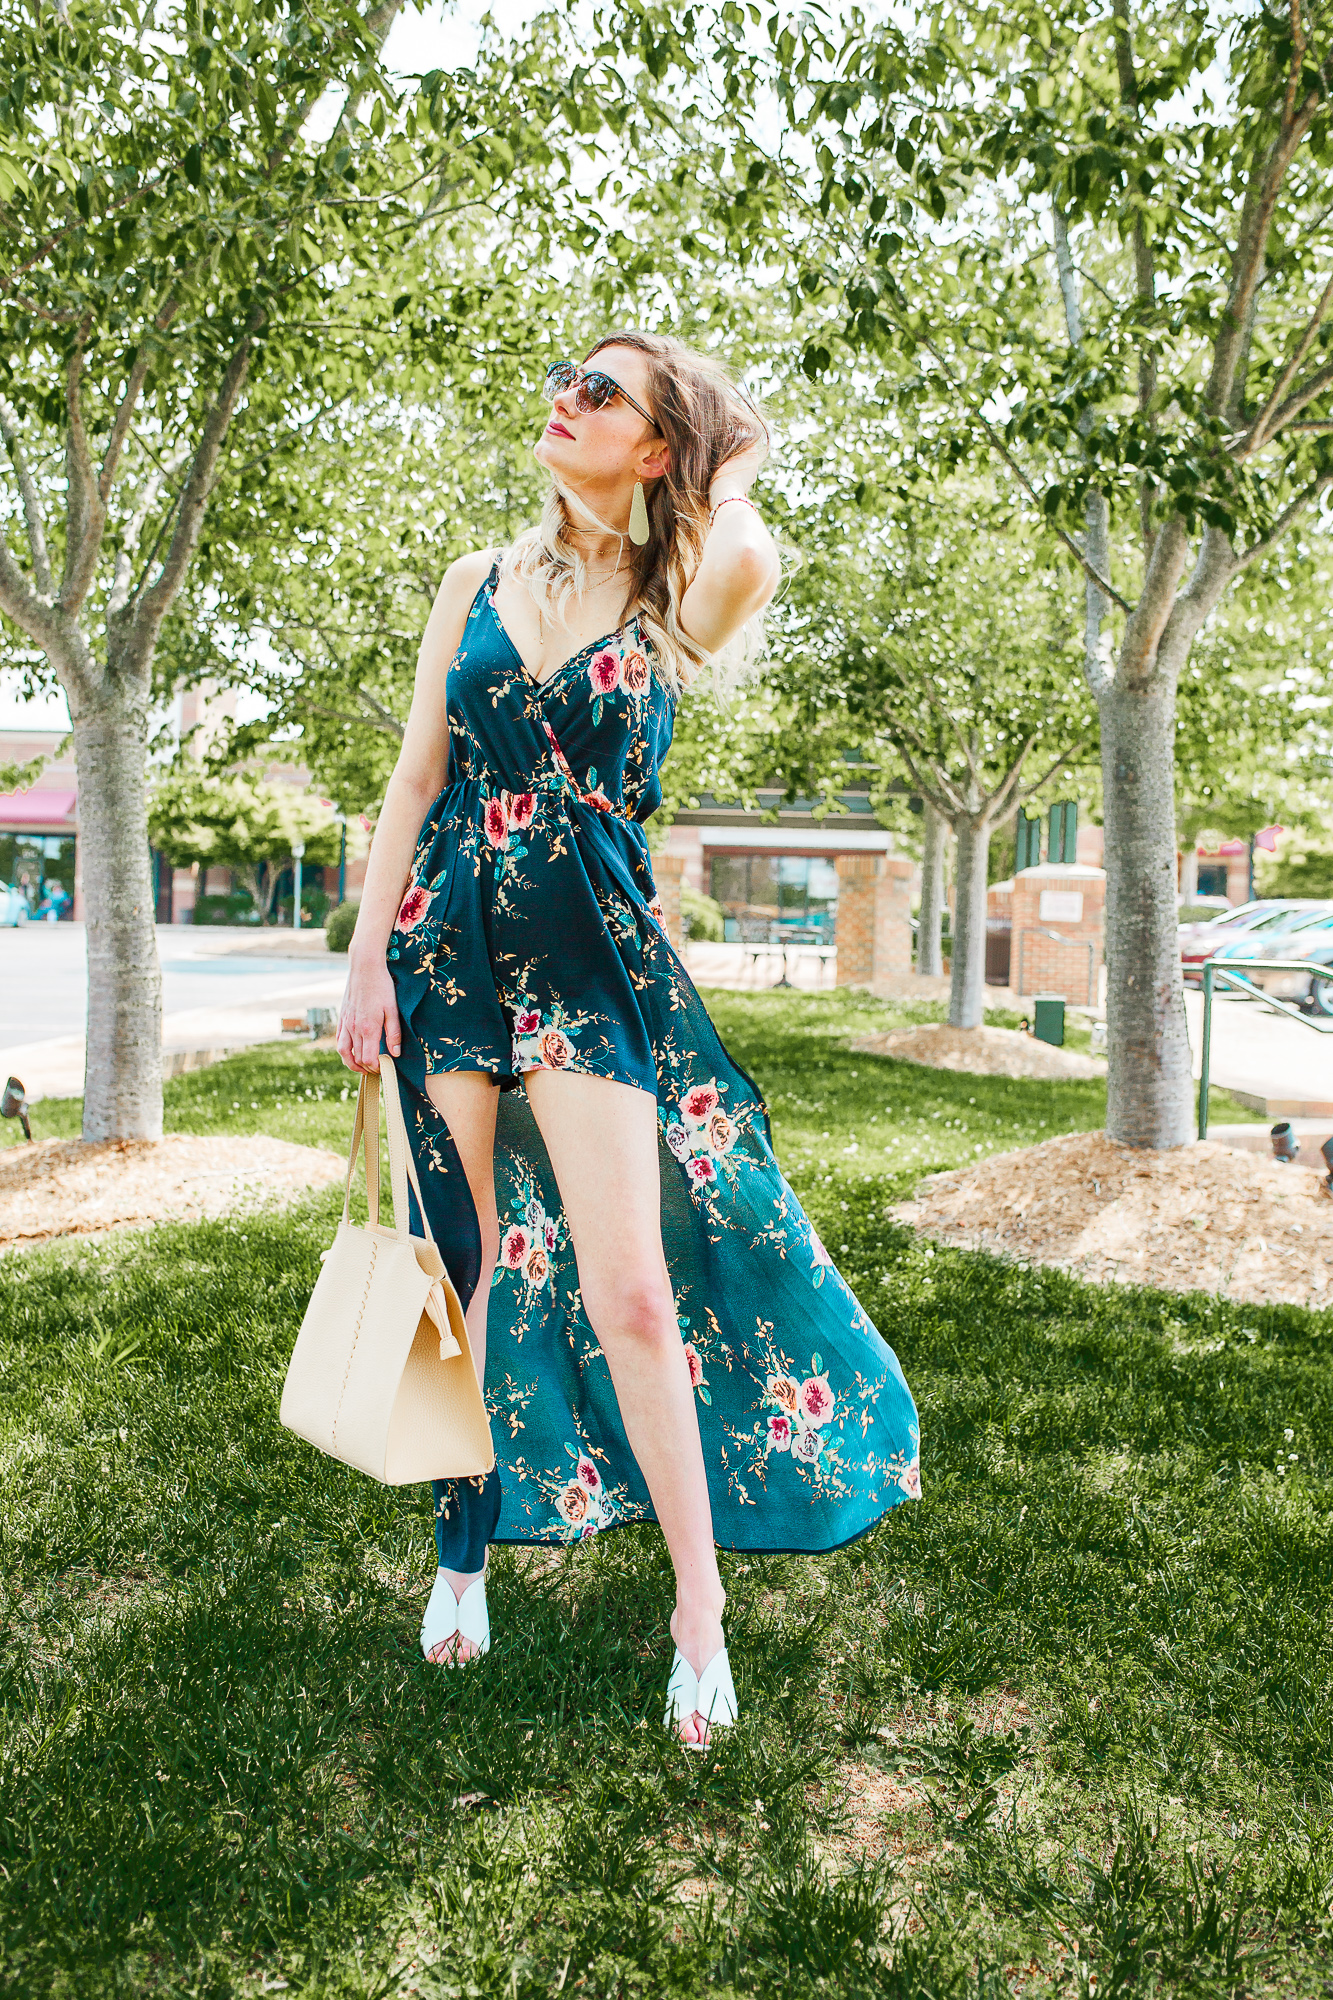 Romper Maxi Dress Combination is the perfect way to dress up during the summer! This summer / spring outfit captures the romper trend, as well as the chunky heel mule trend. North Carolina fashion and lifestyle blogger Jessica Linn is wearing a romper maxi dress from Copper Bloom, a nude purse by Universal Thread from Target, white chunky heel mules by Who What Wear from Target, gold leather statement earrings from RSA Studios, and a layered choker necklace from sugar fix Baublebar.